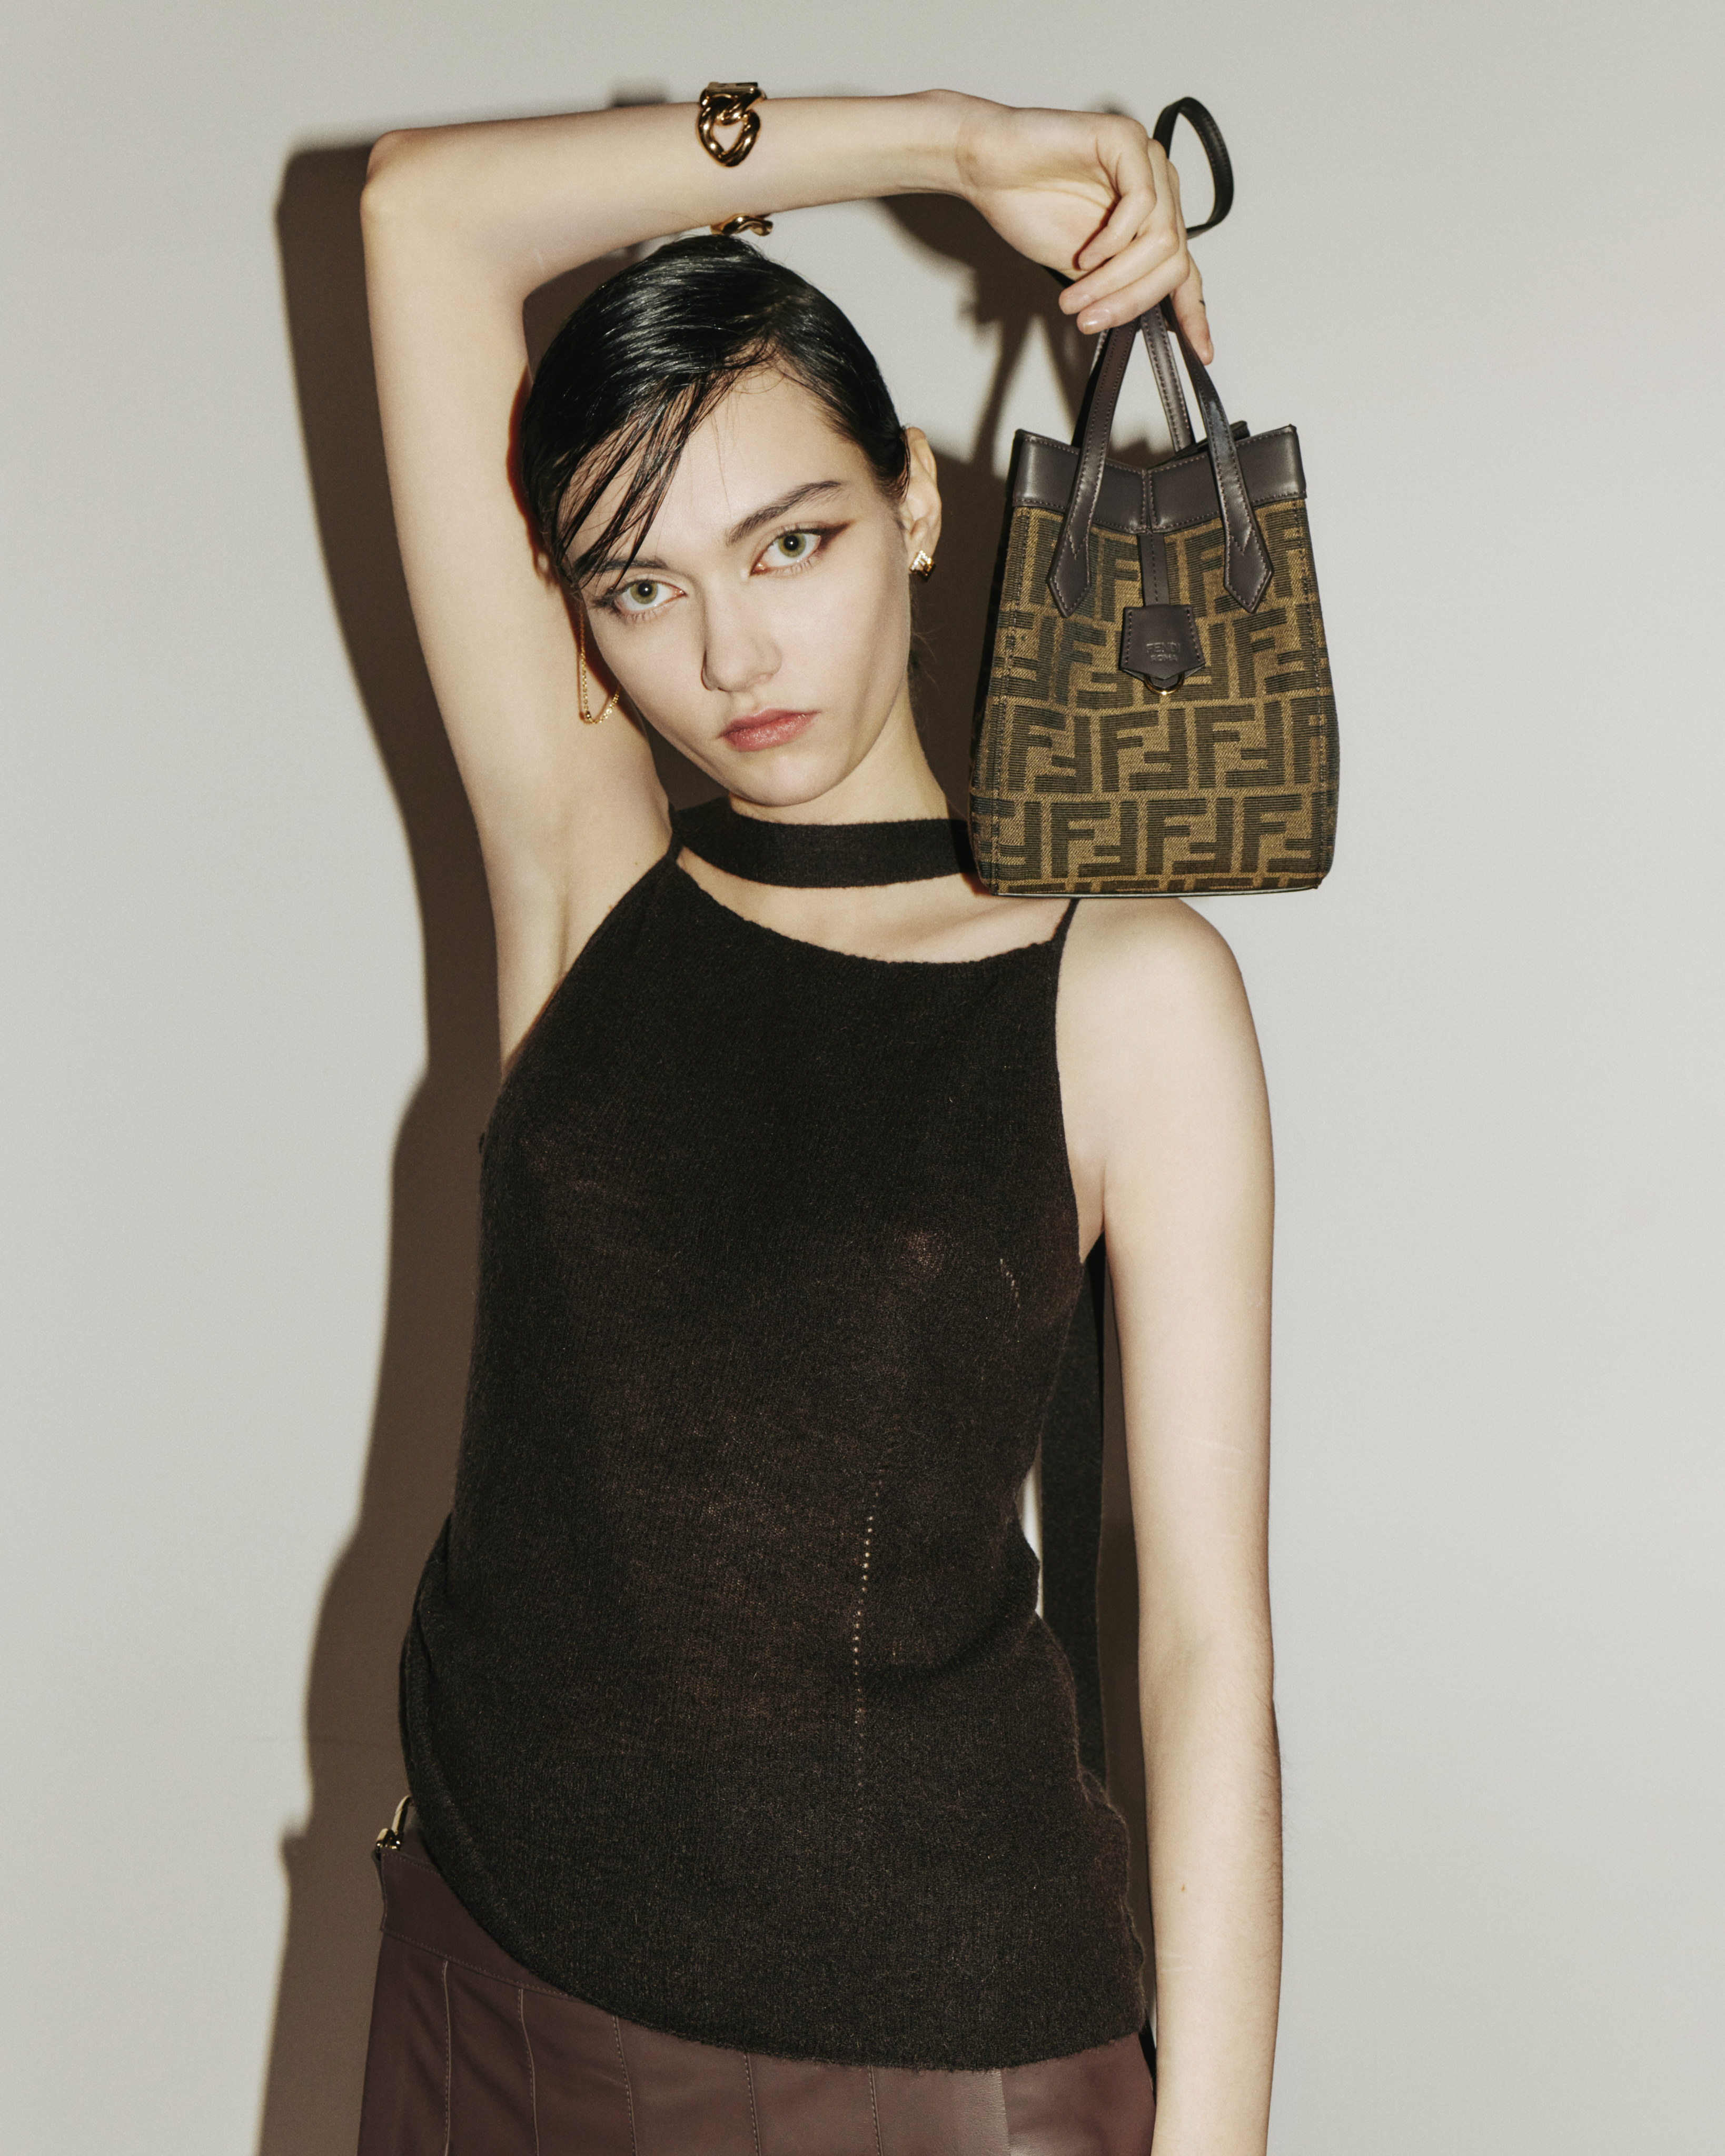 Three fashion highlights from October, including the Fendi Origami bag. Photo: Handout